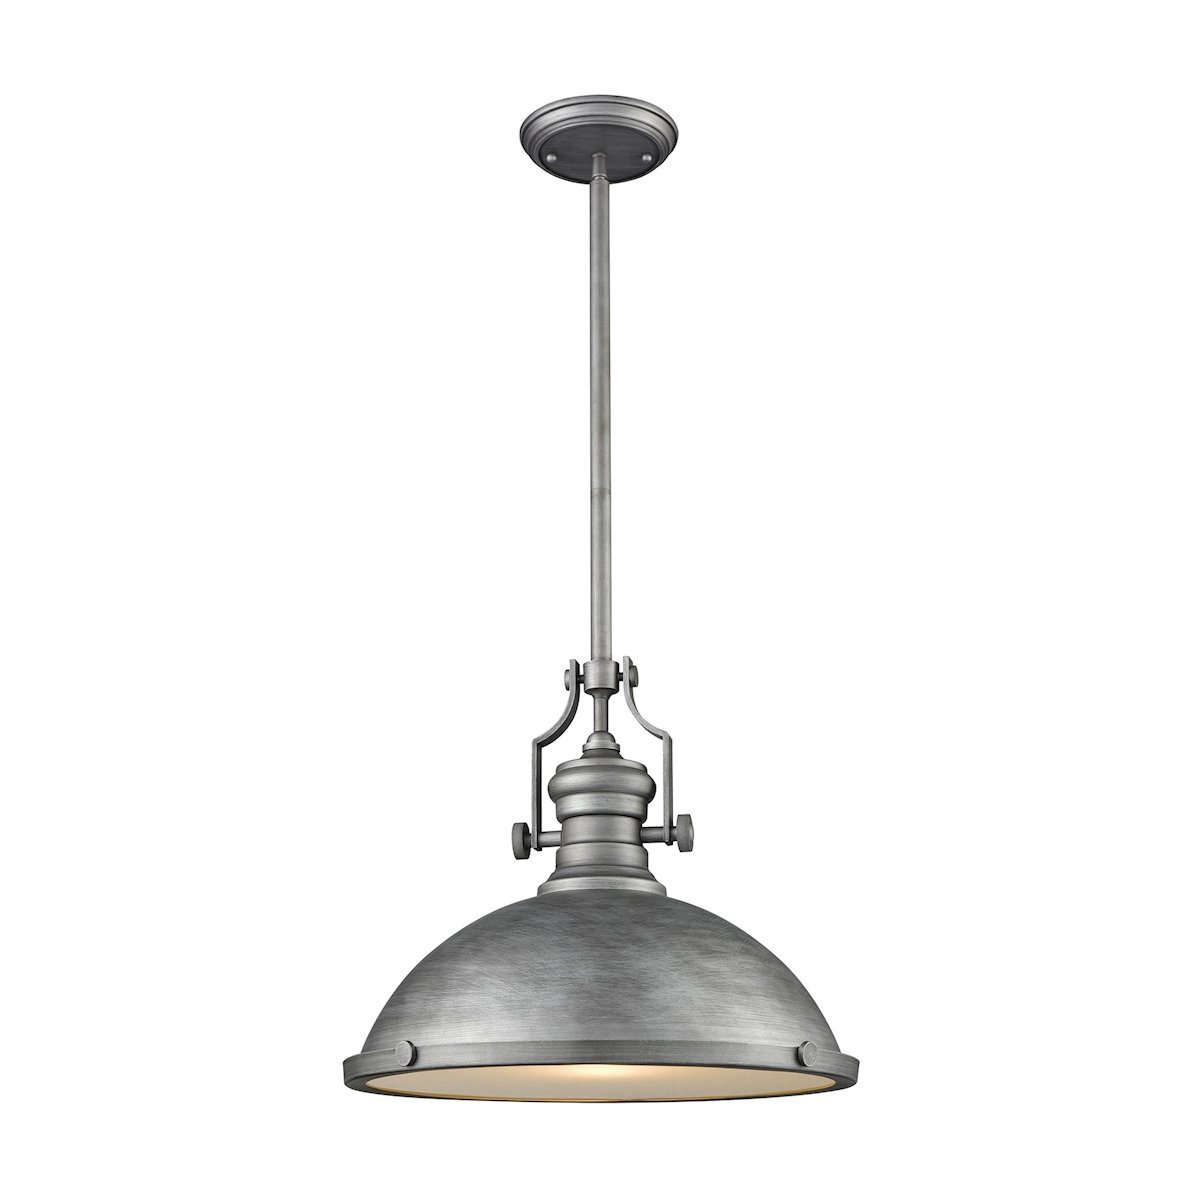 Chadwick 1 Light Pendant In Weathered Zinc With Frosted Glass Diffuser Ceiling Elk Lighting 